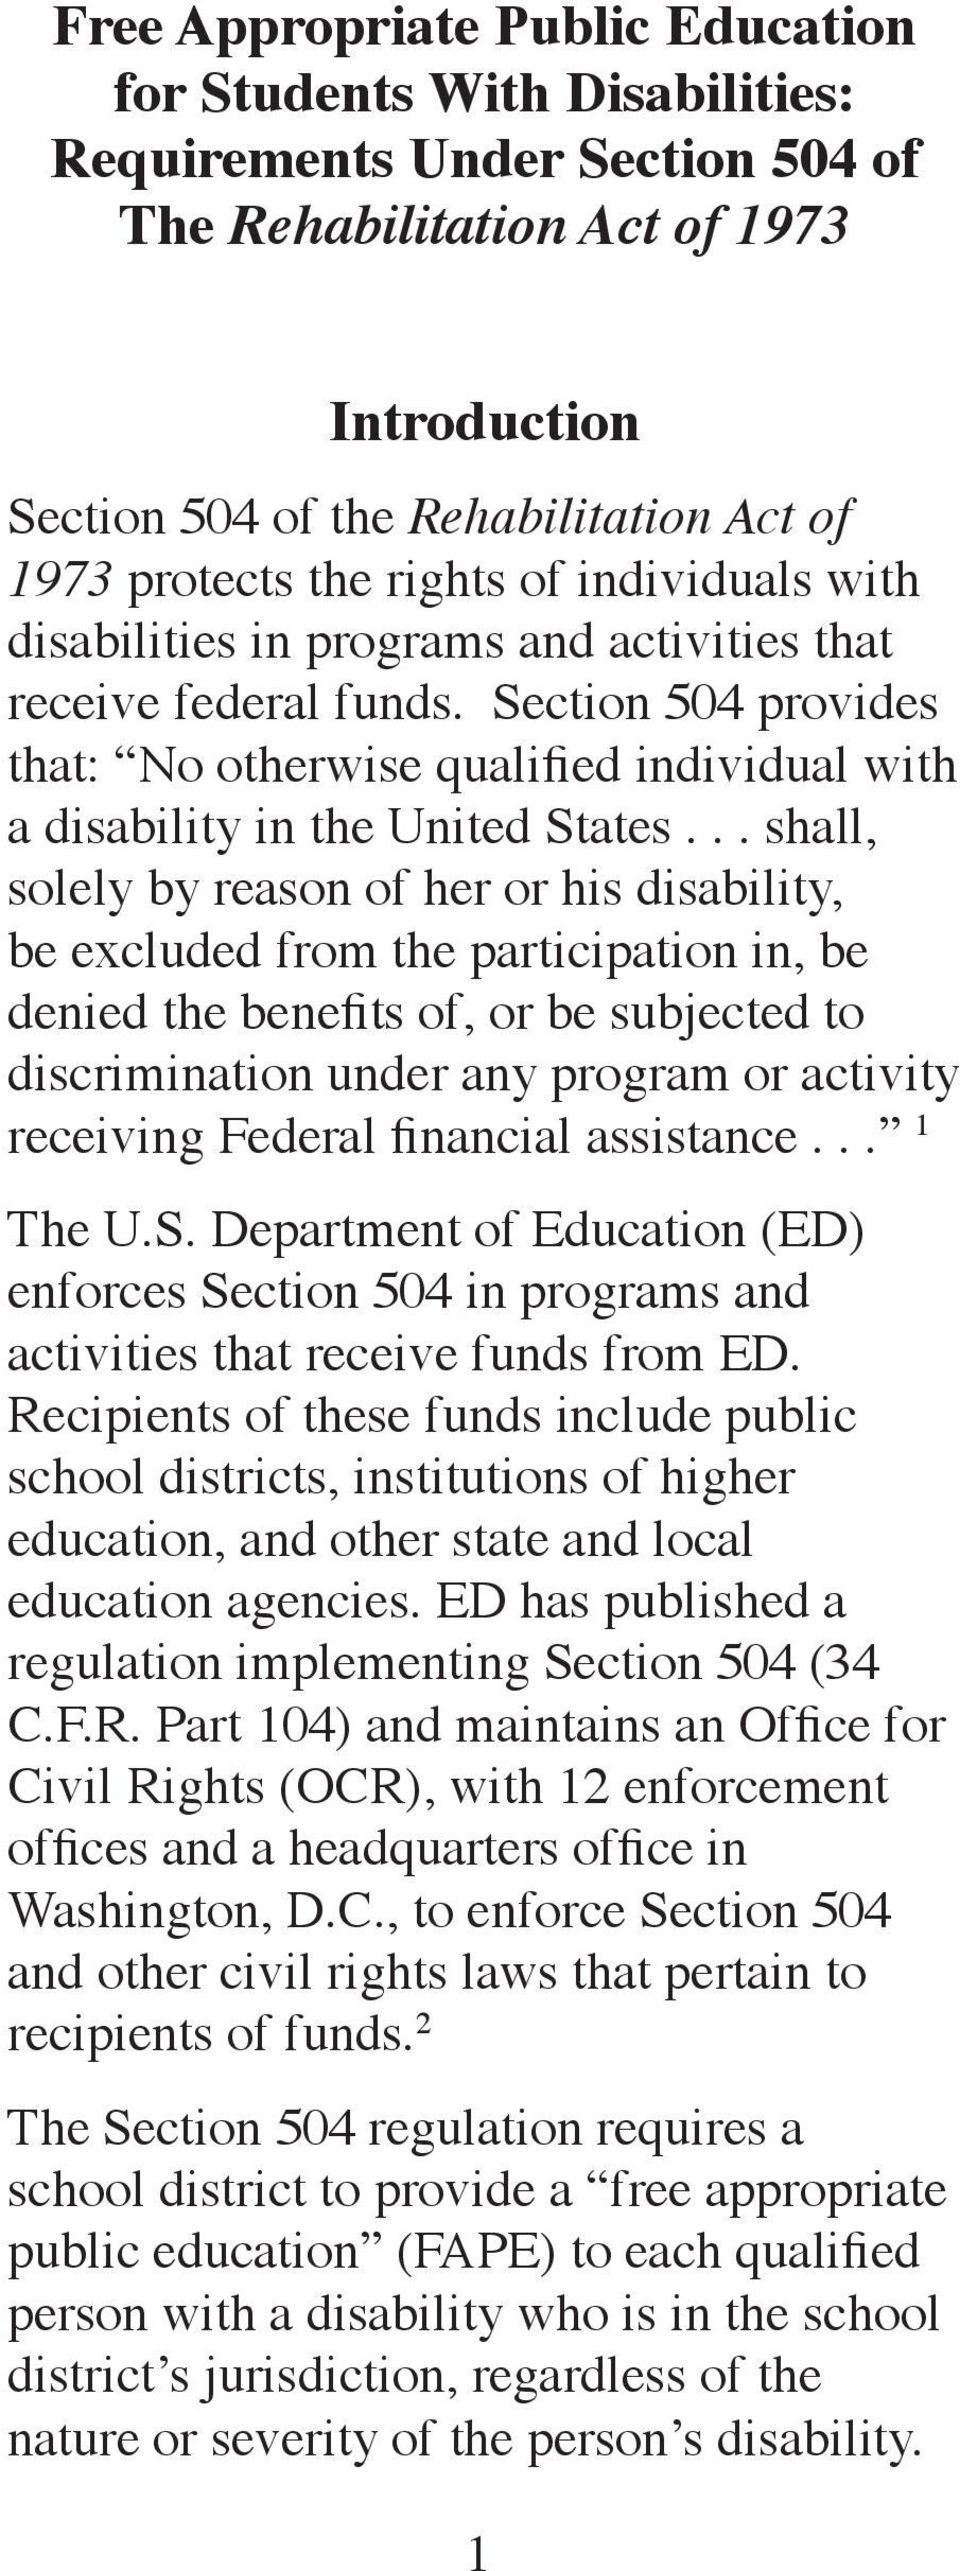 .. shall, solely by reason of her or his disability, be excluded from the participation in, be denied the benefits of, or be subjected to discrimination under any program or activity receiving